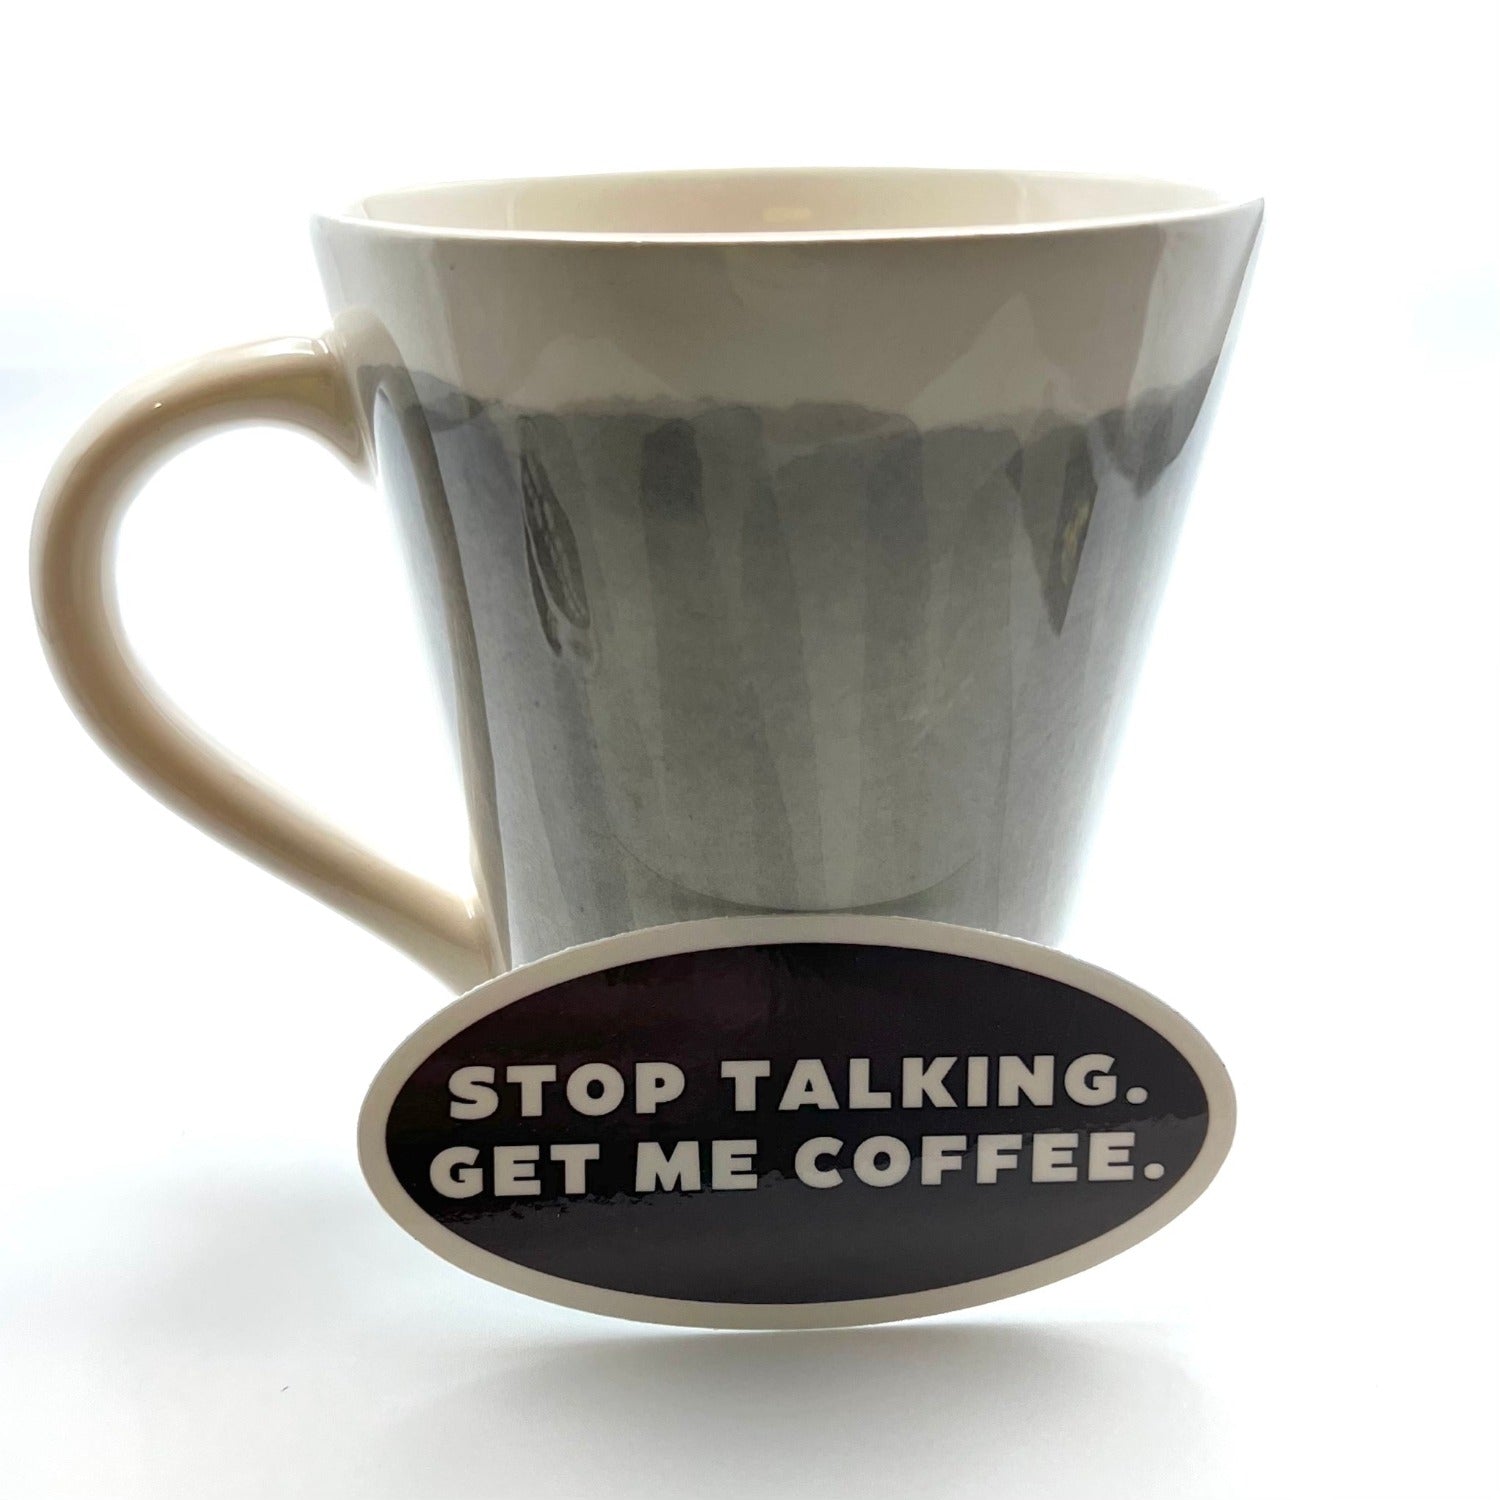 Gray and off-white coffee mug with oval chocolate brown sticker with white font leaning against it, "STOP TALKING. GET ME COFFEE."